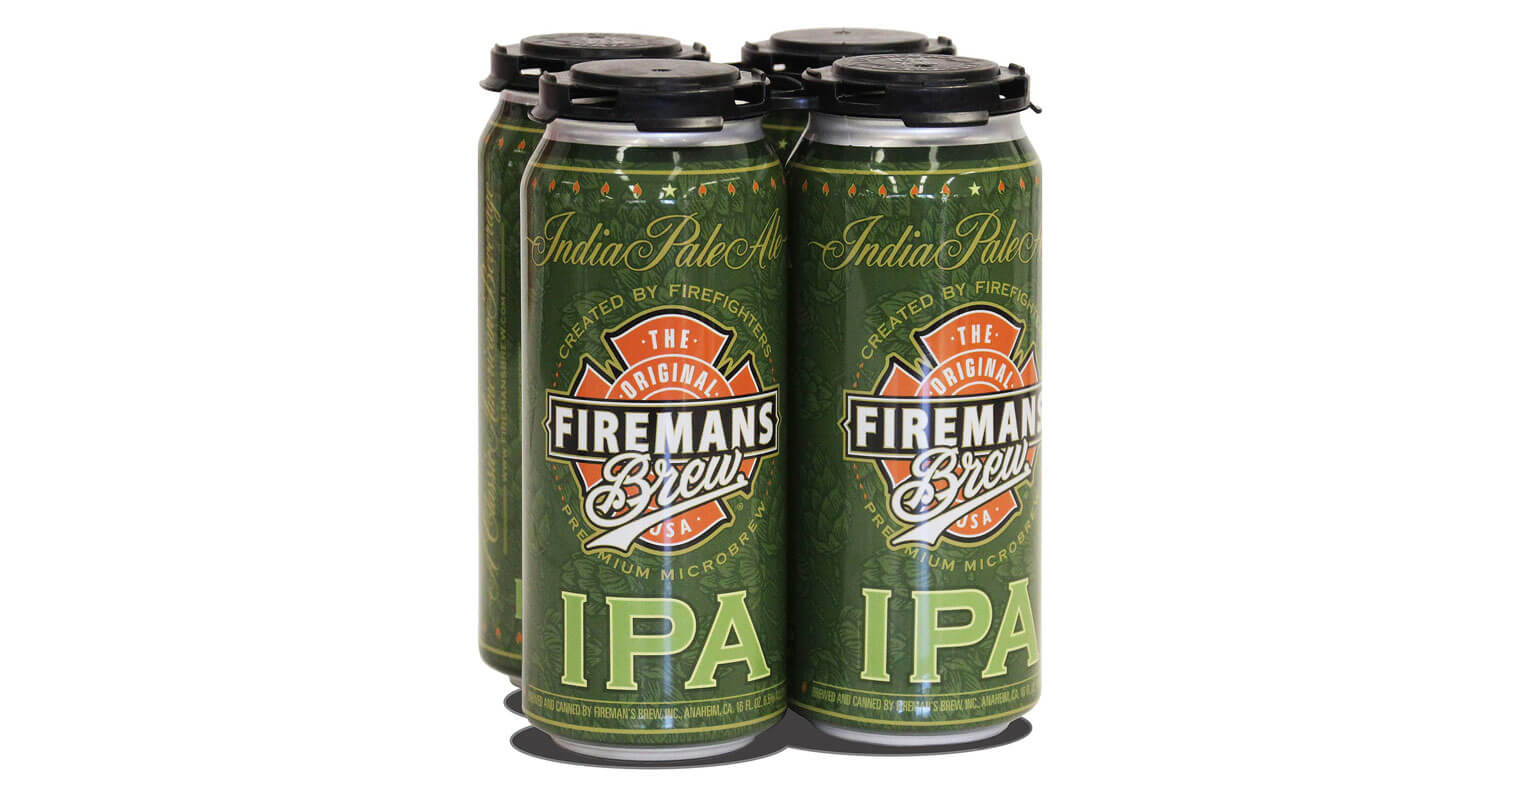 Fireman's Brew Introduces New IPA, featured image